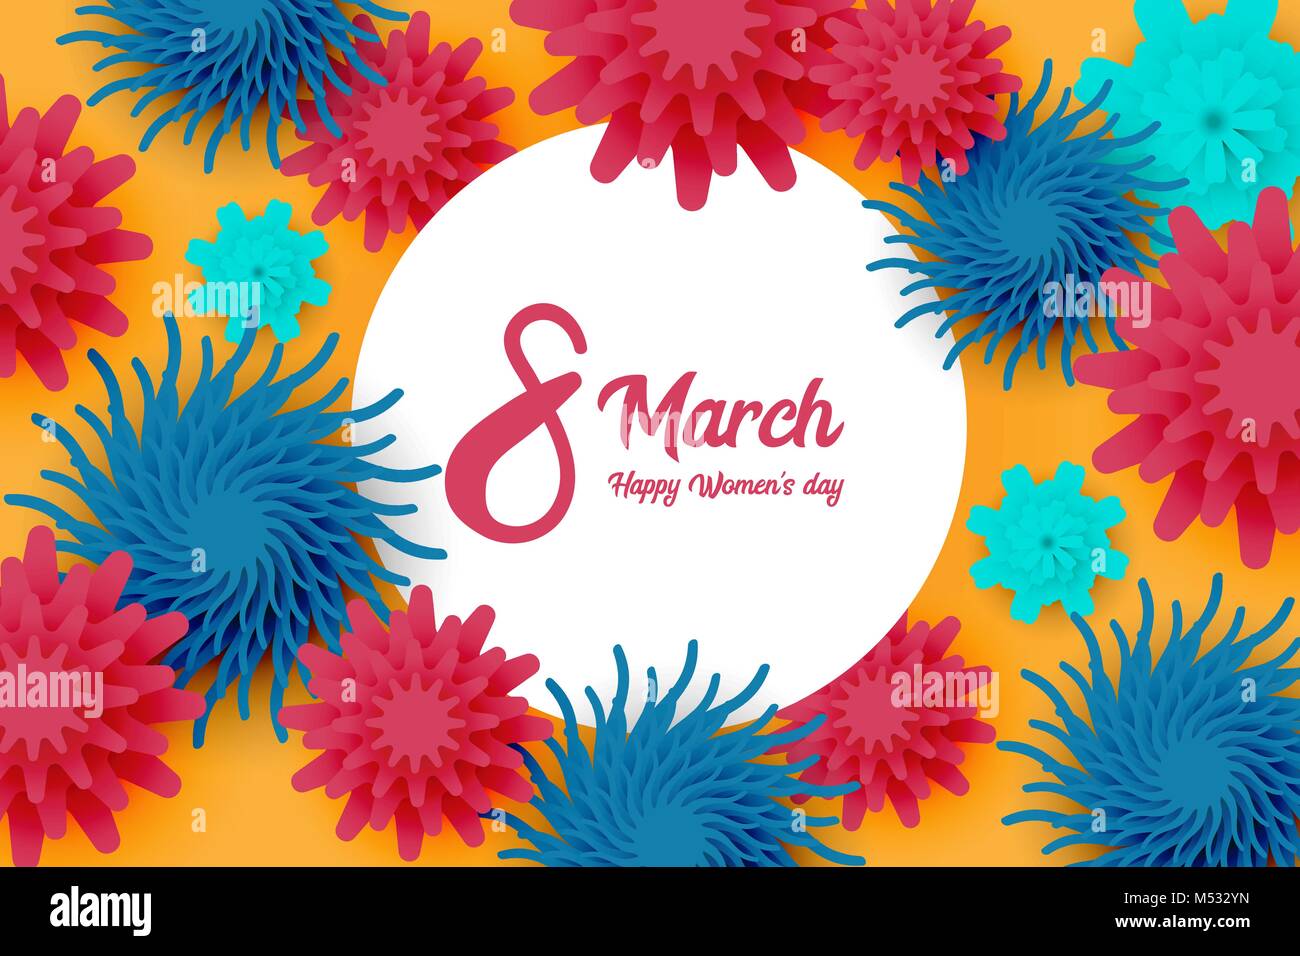 8 march mothers womens day Stock Vector